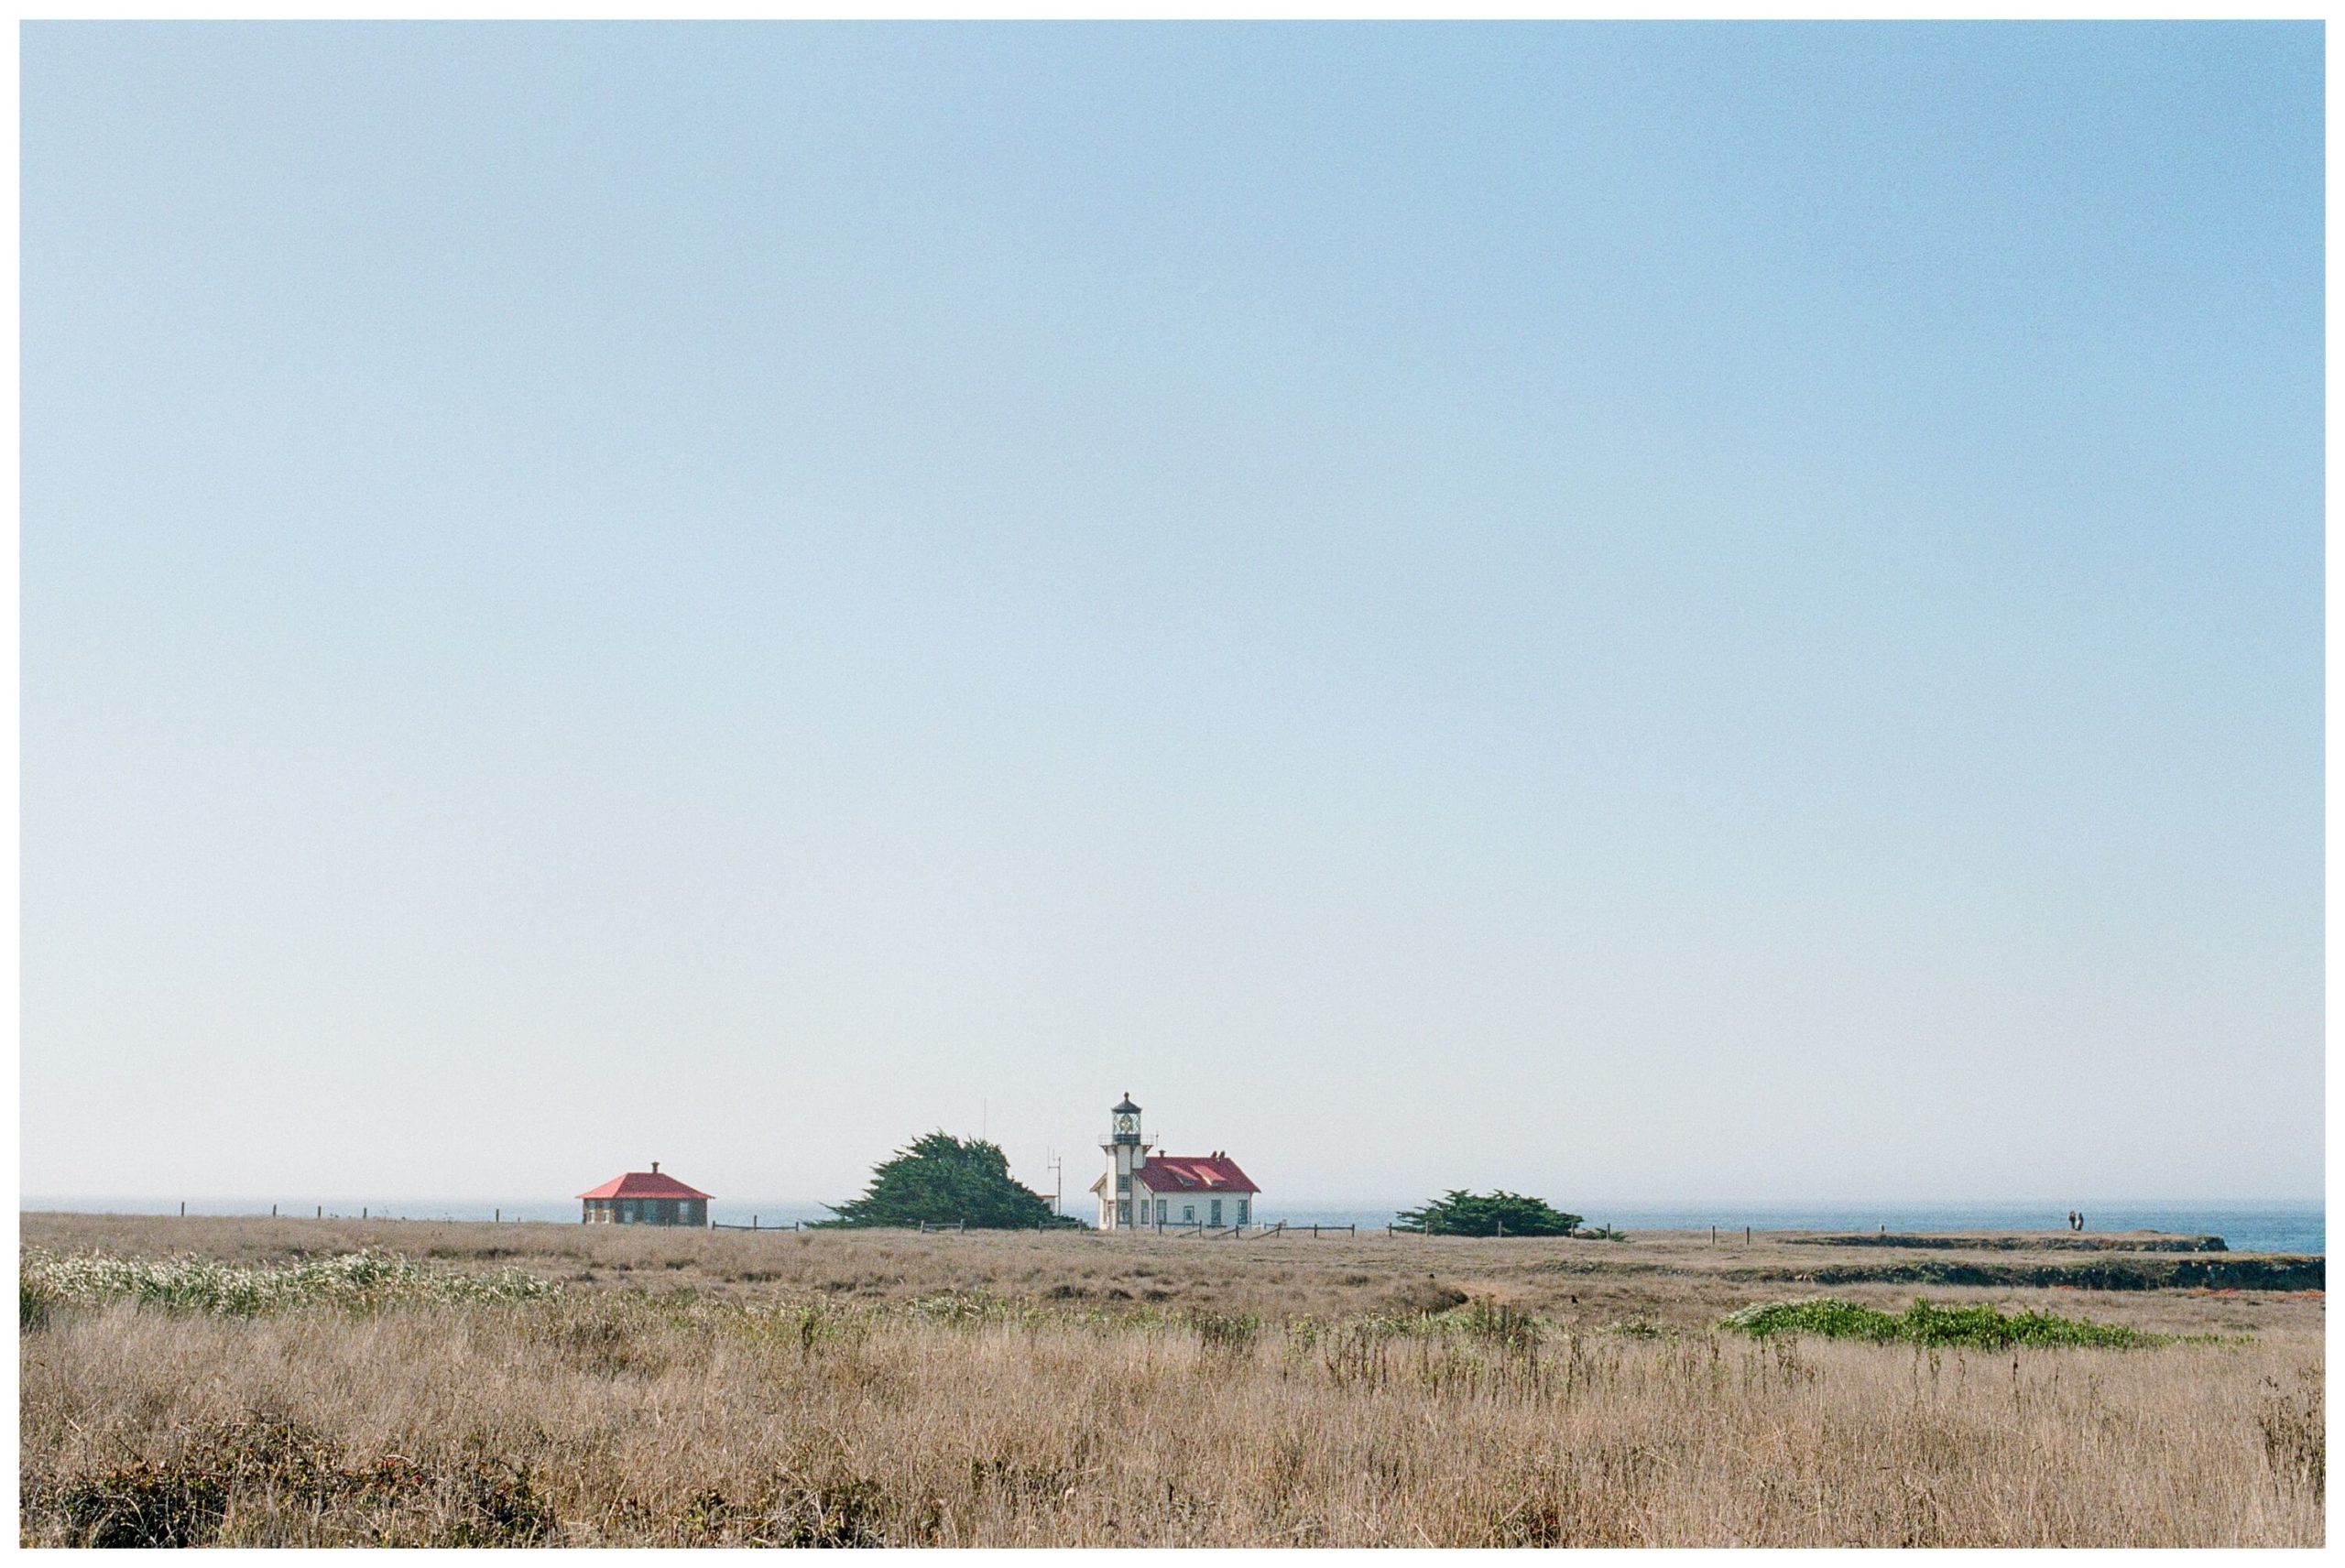 The Point Cabrillo Lighthouse sits in the distance, bordered by the Pacific Ocean and alone in a vast, golden field.